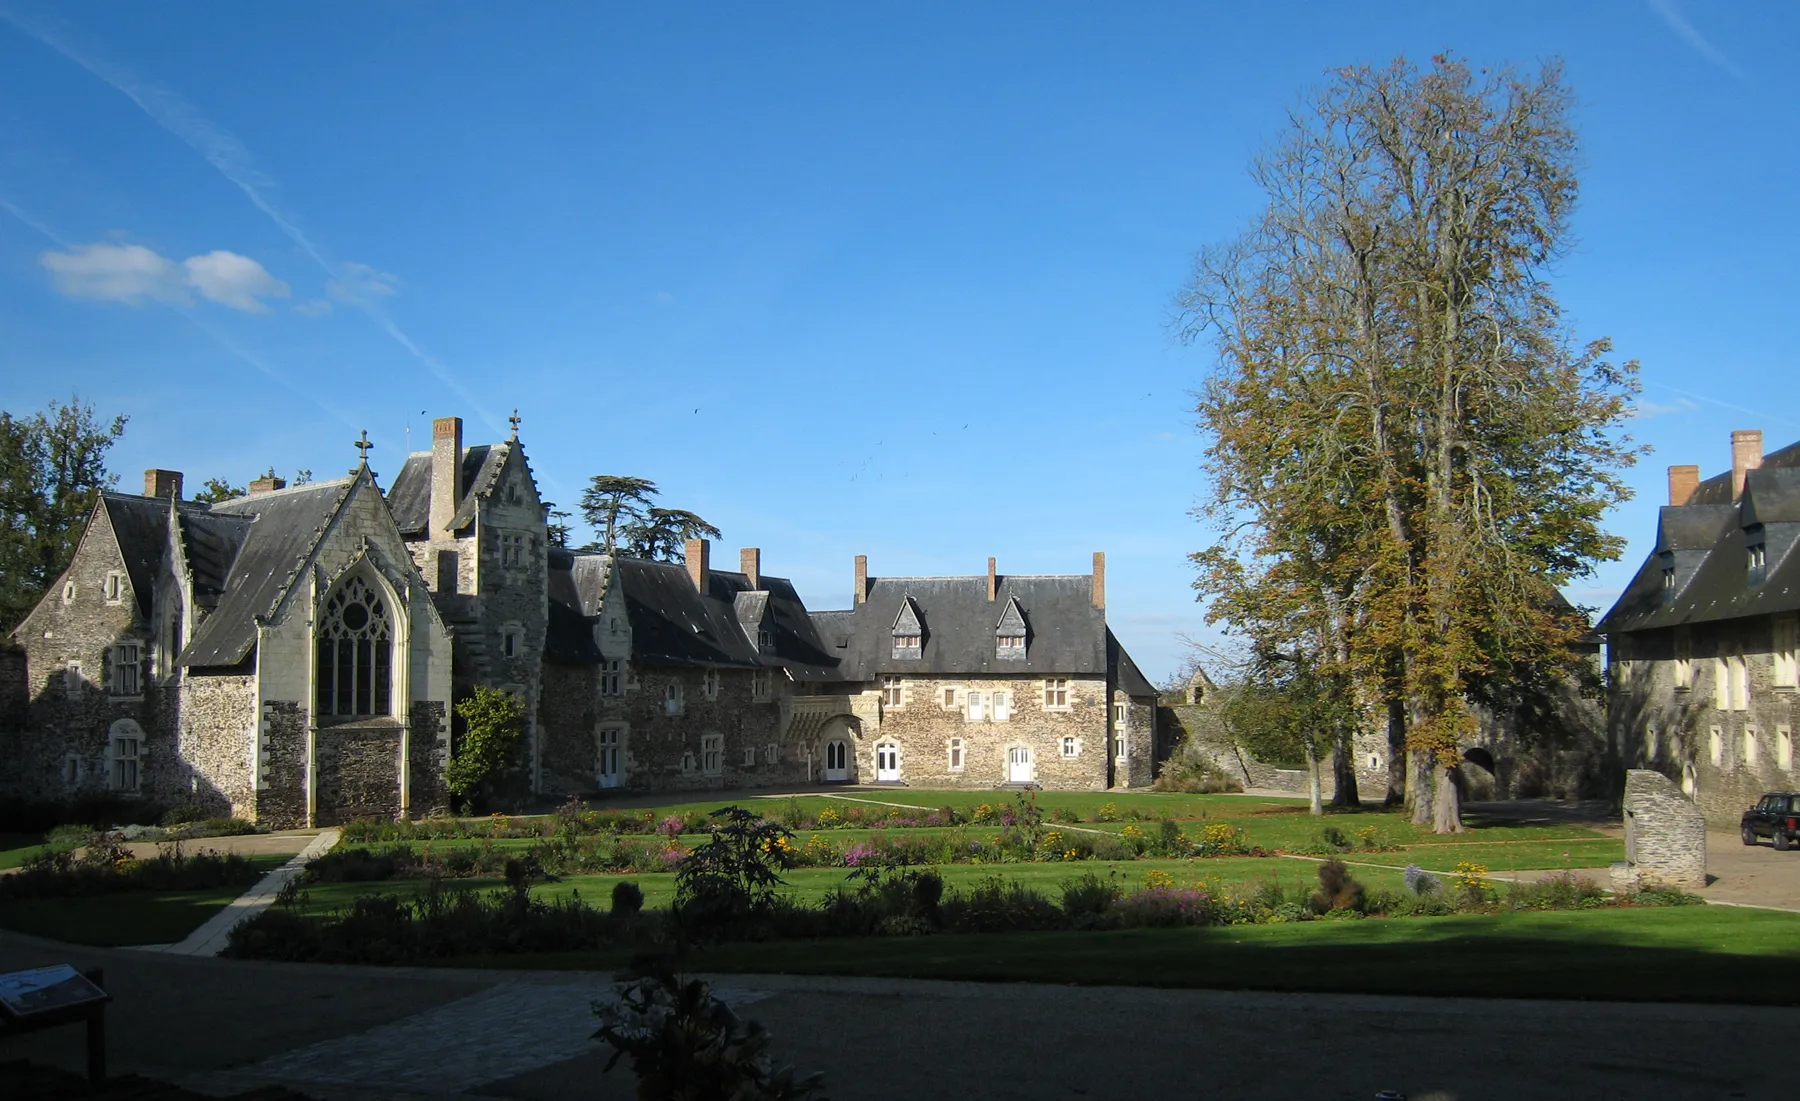 Photo showing: Courtyard of the castle Le Plessis-Macé, located in the village of Le Plessis-Macé near the town of Angers in the department of Maine-et-Loire, France.